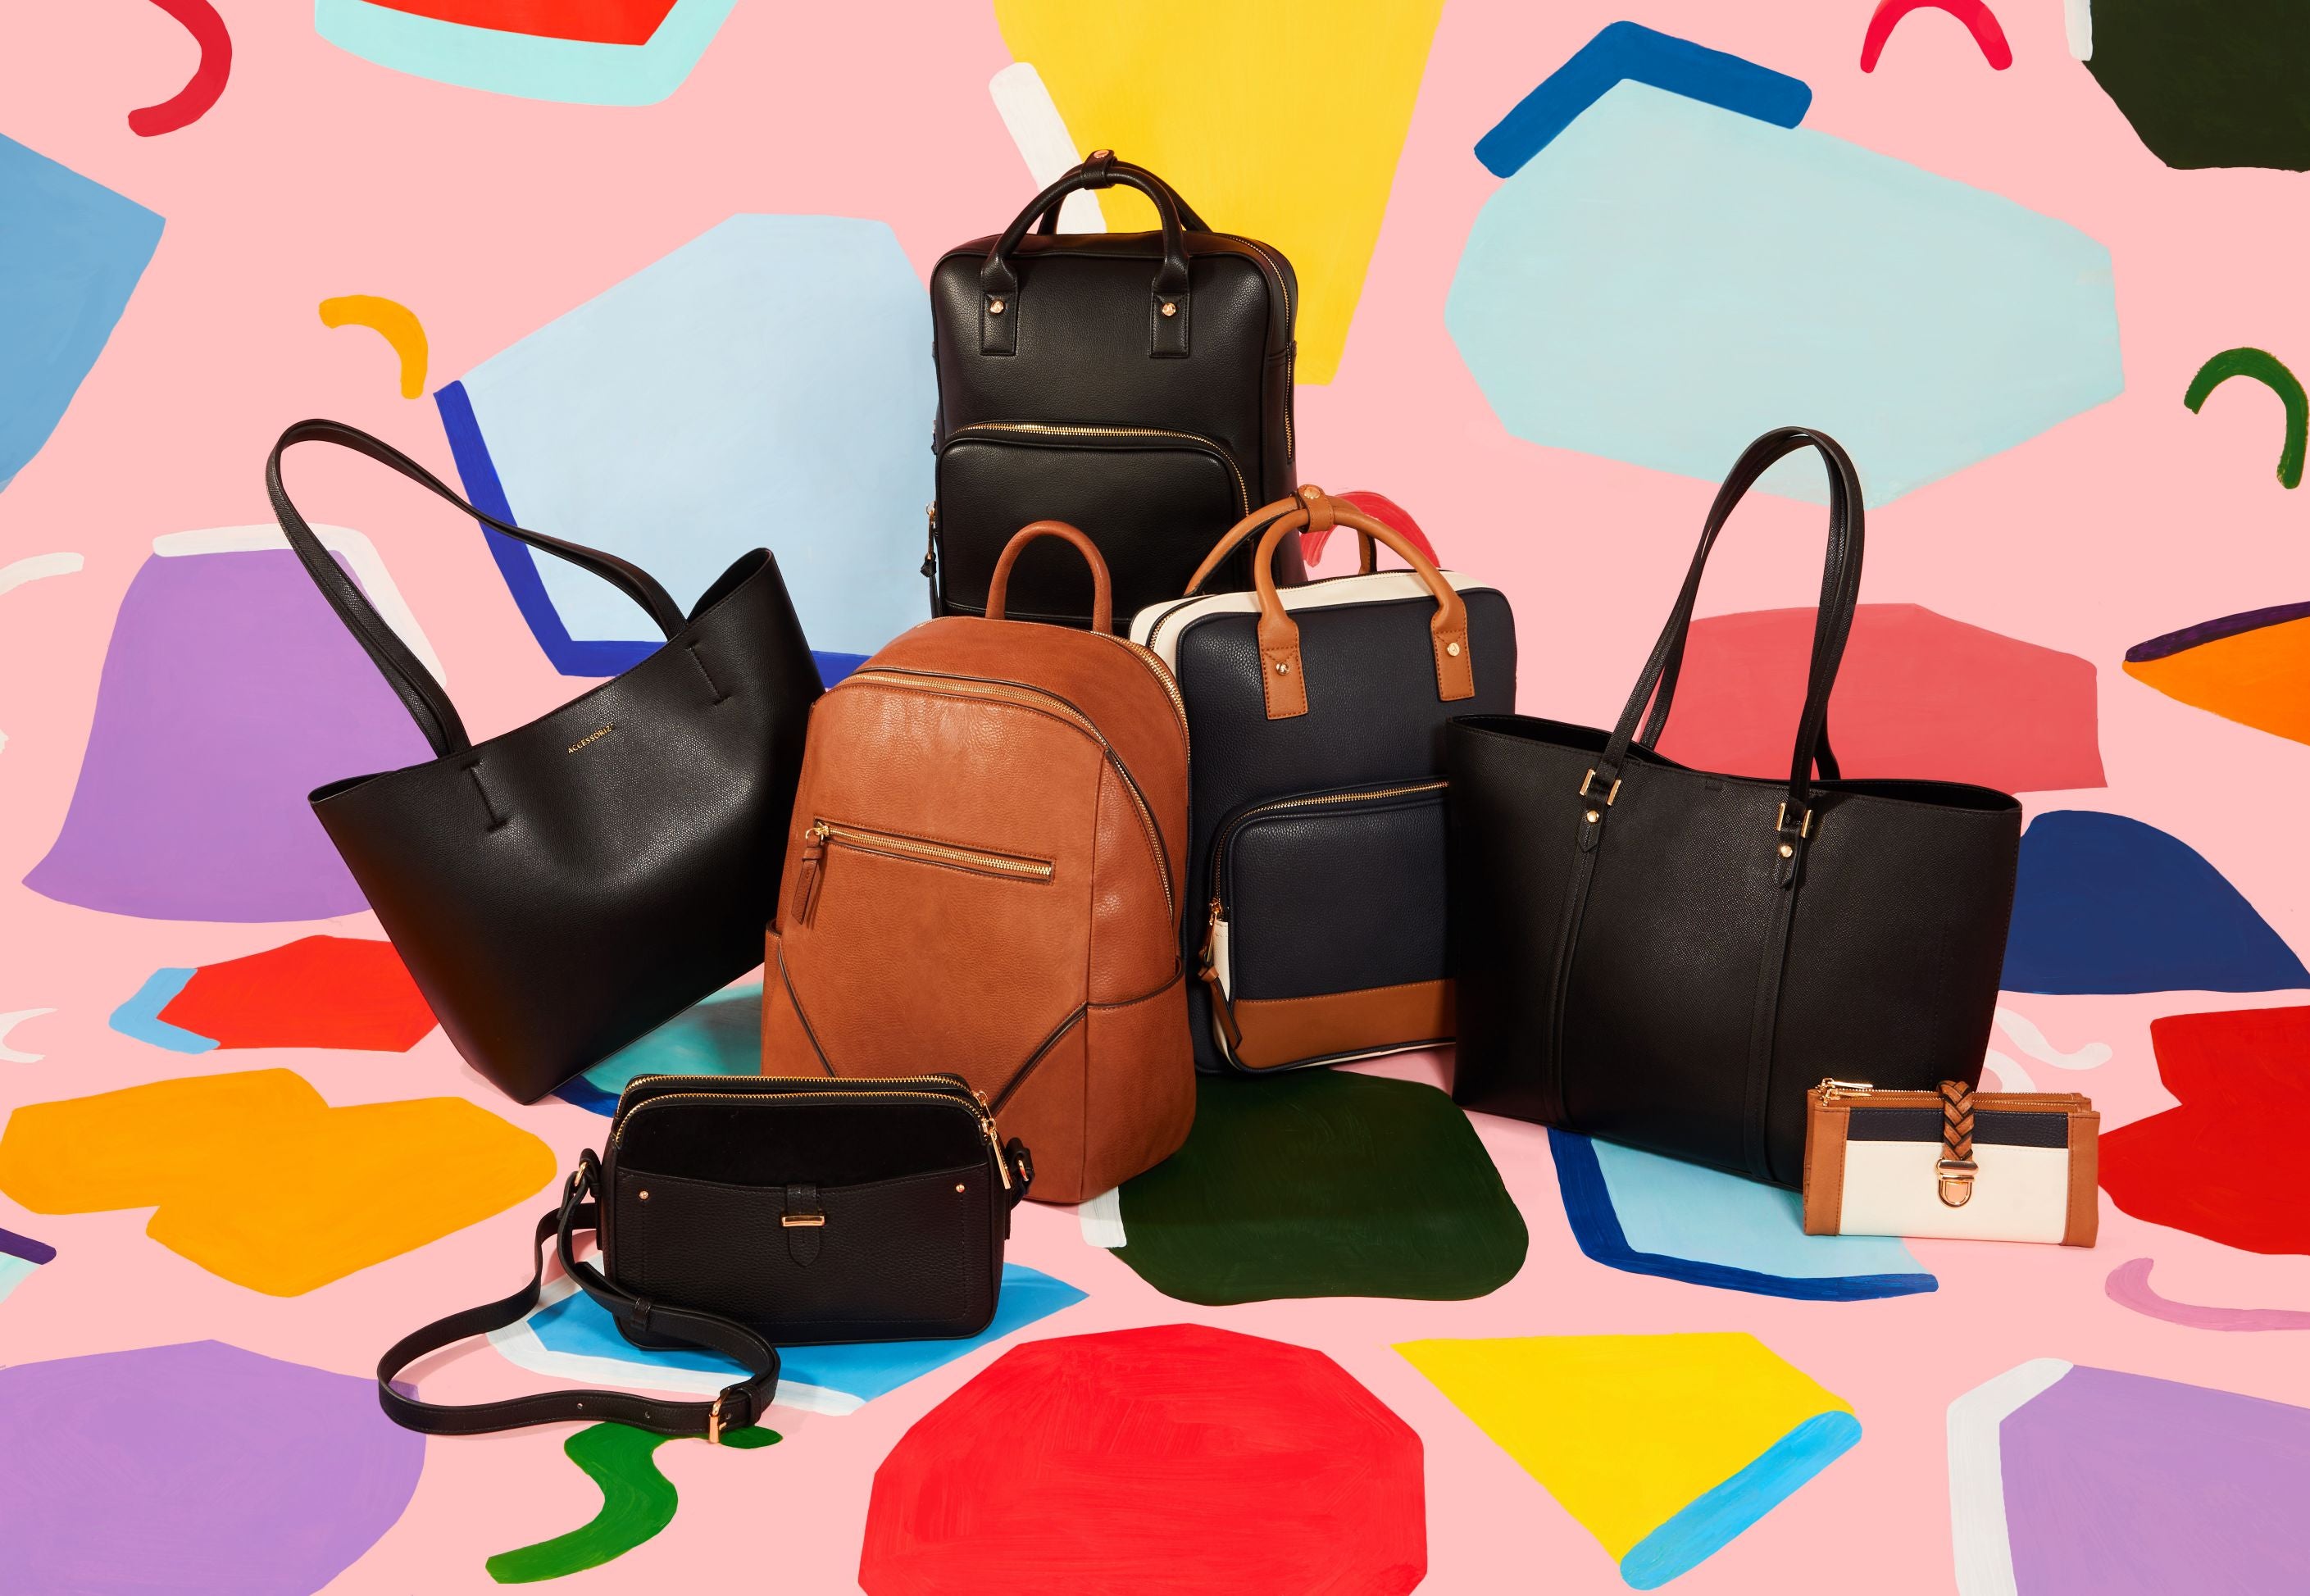 5 BEST WORK BAGS FOR WOMEN 2023: A COMPREHENSIVE GUIDE